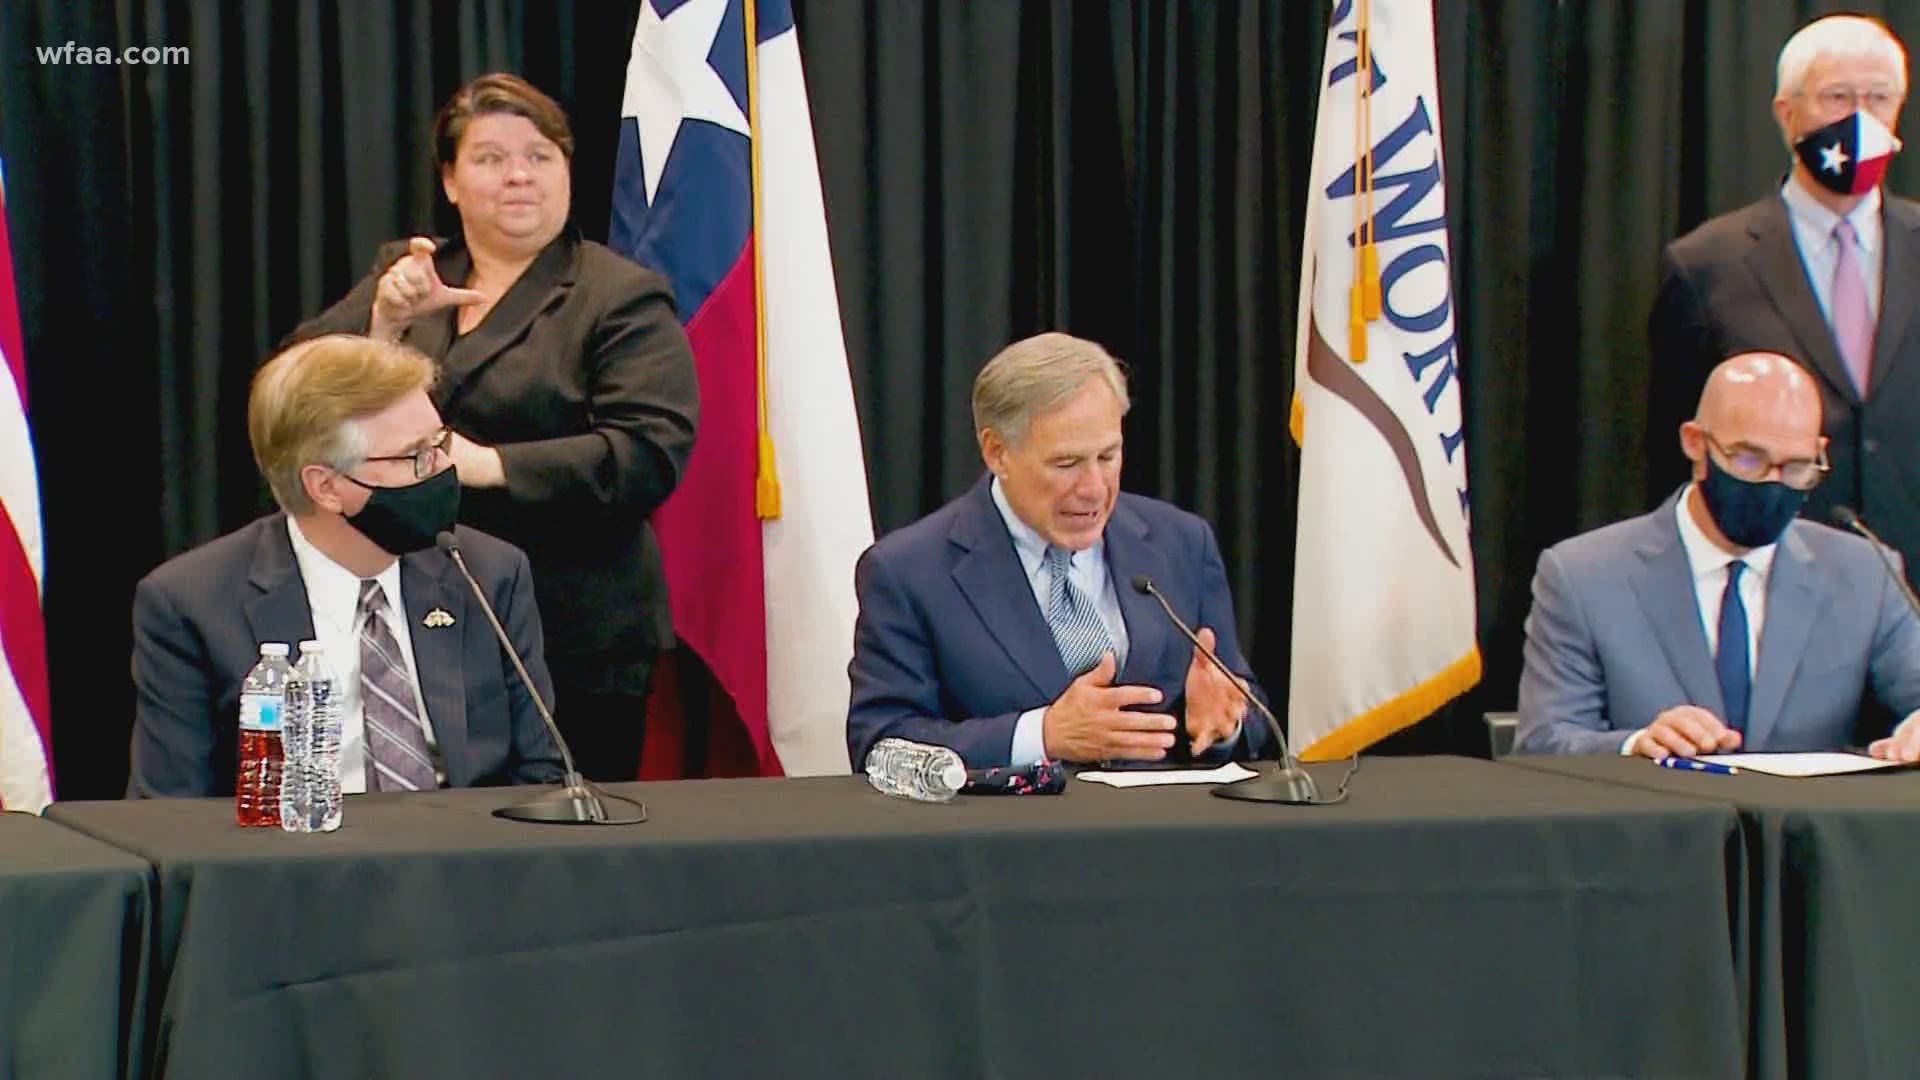 Gov. Abbott announced a legislative proposal Tuesday where any city that defunds police departments will have its property tax revenue frozen at its current rate.